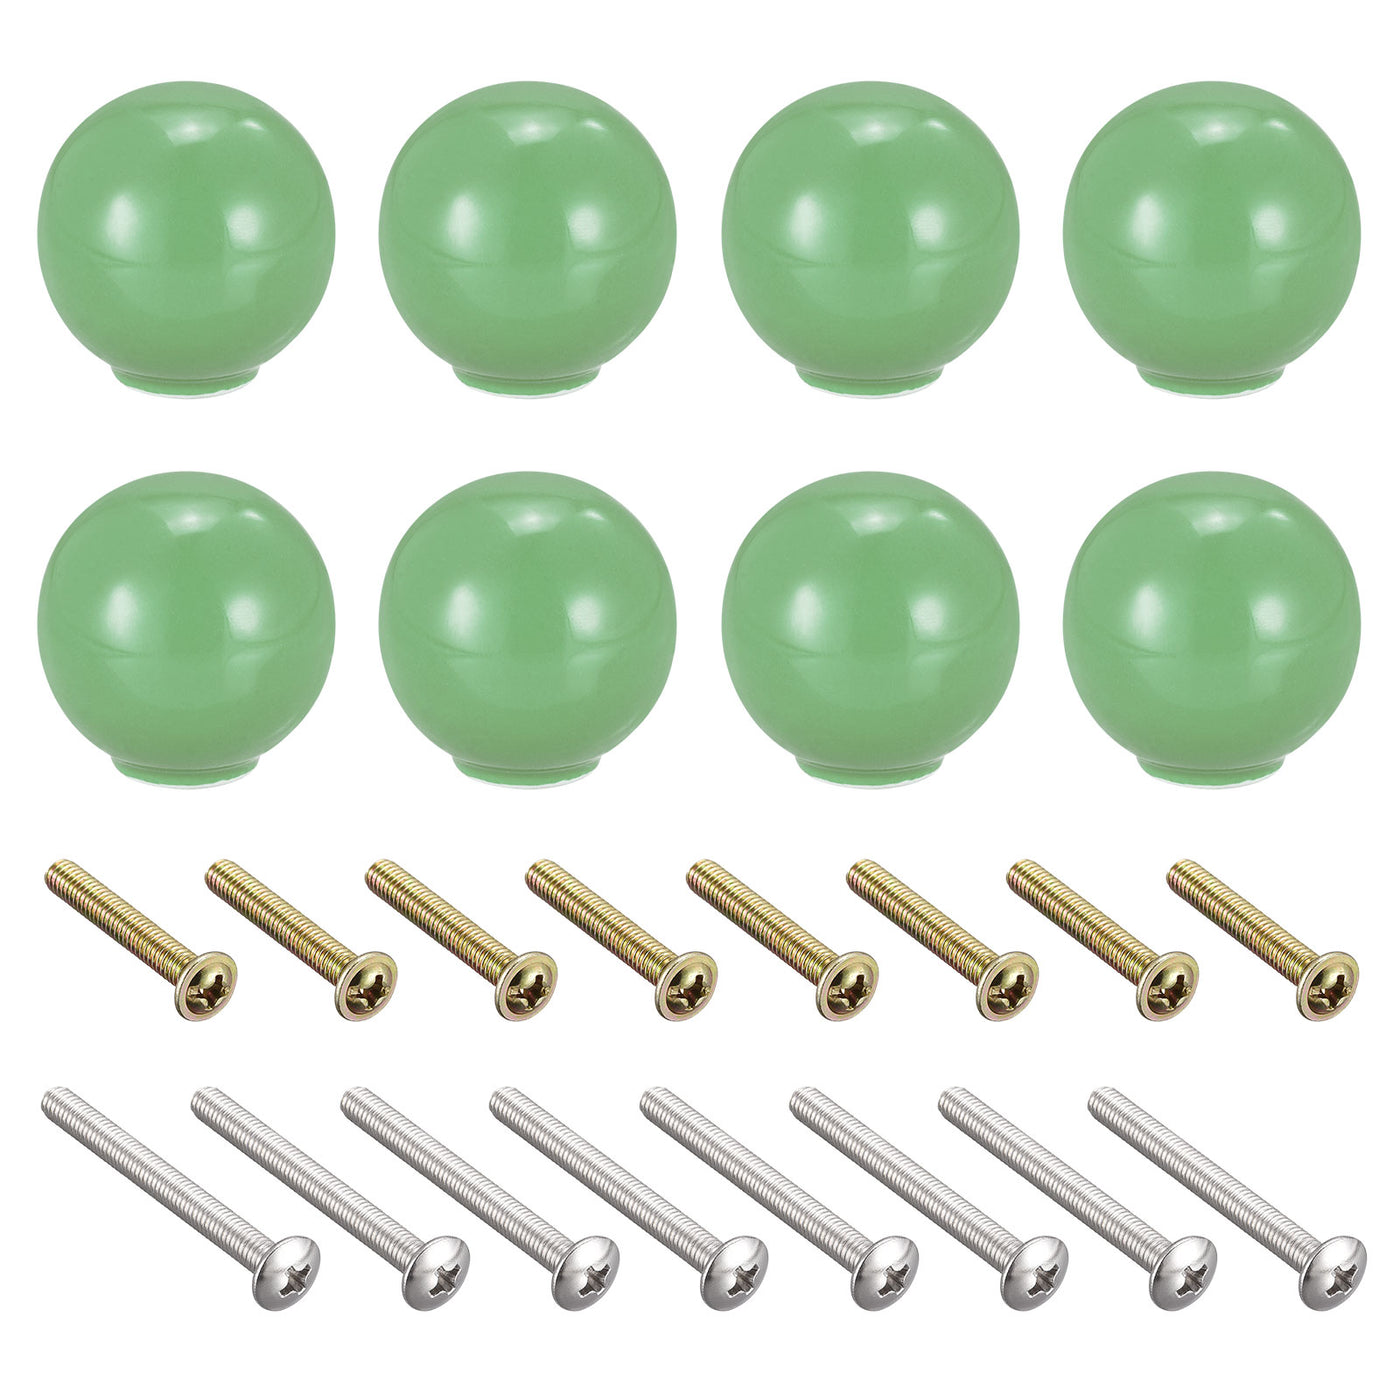 Uxcell Uxcell 33x35mm Ceramic Drawer Knobs, 8pcs Ball Shape Door Pull Handles Gray